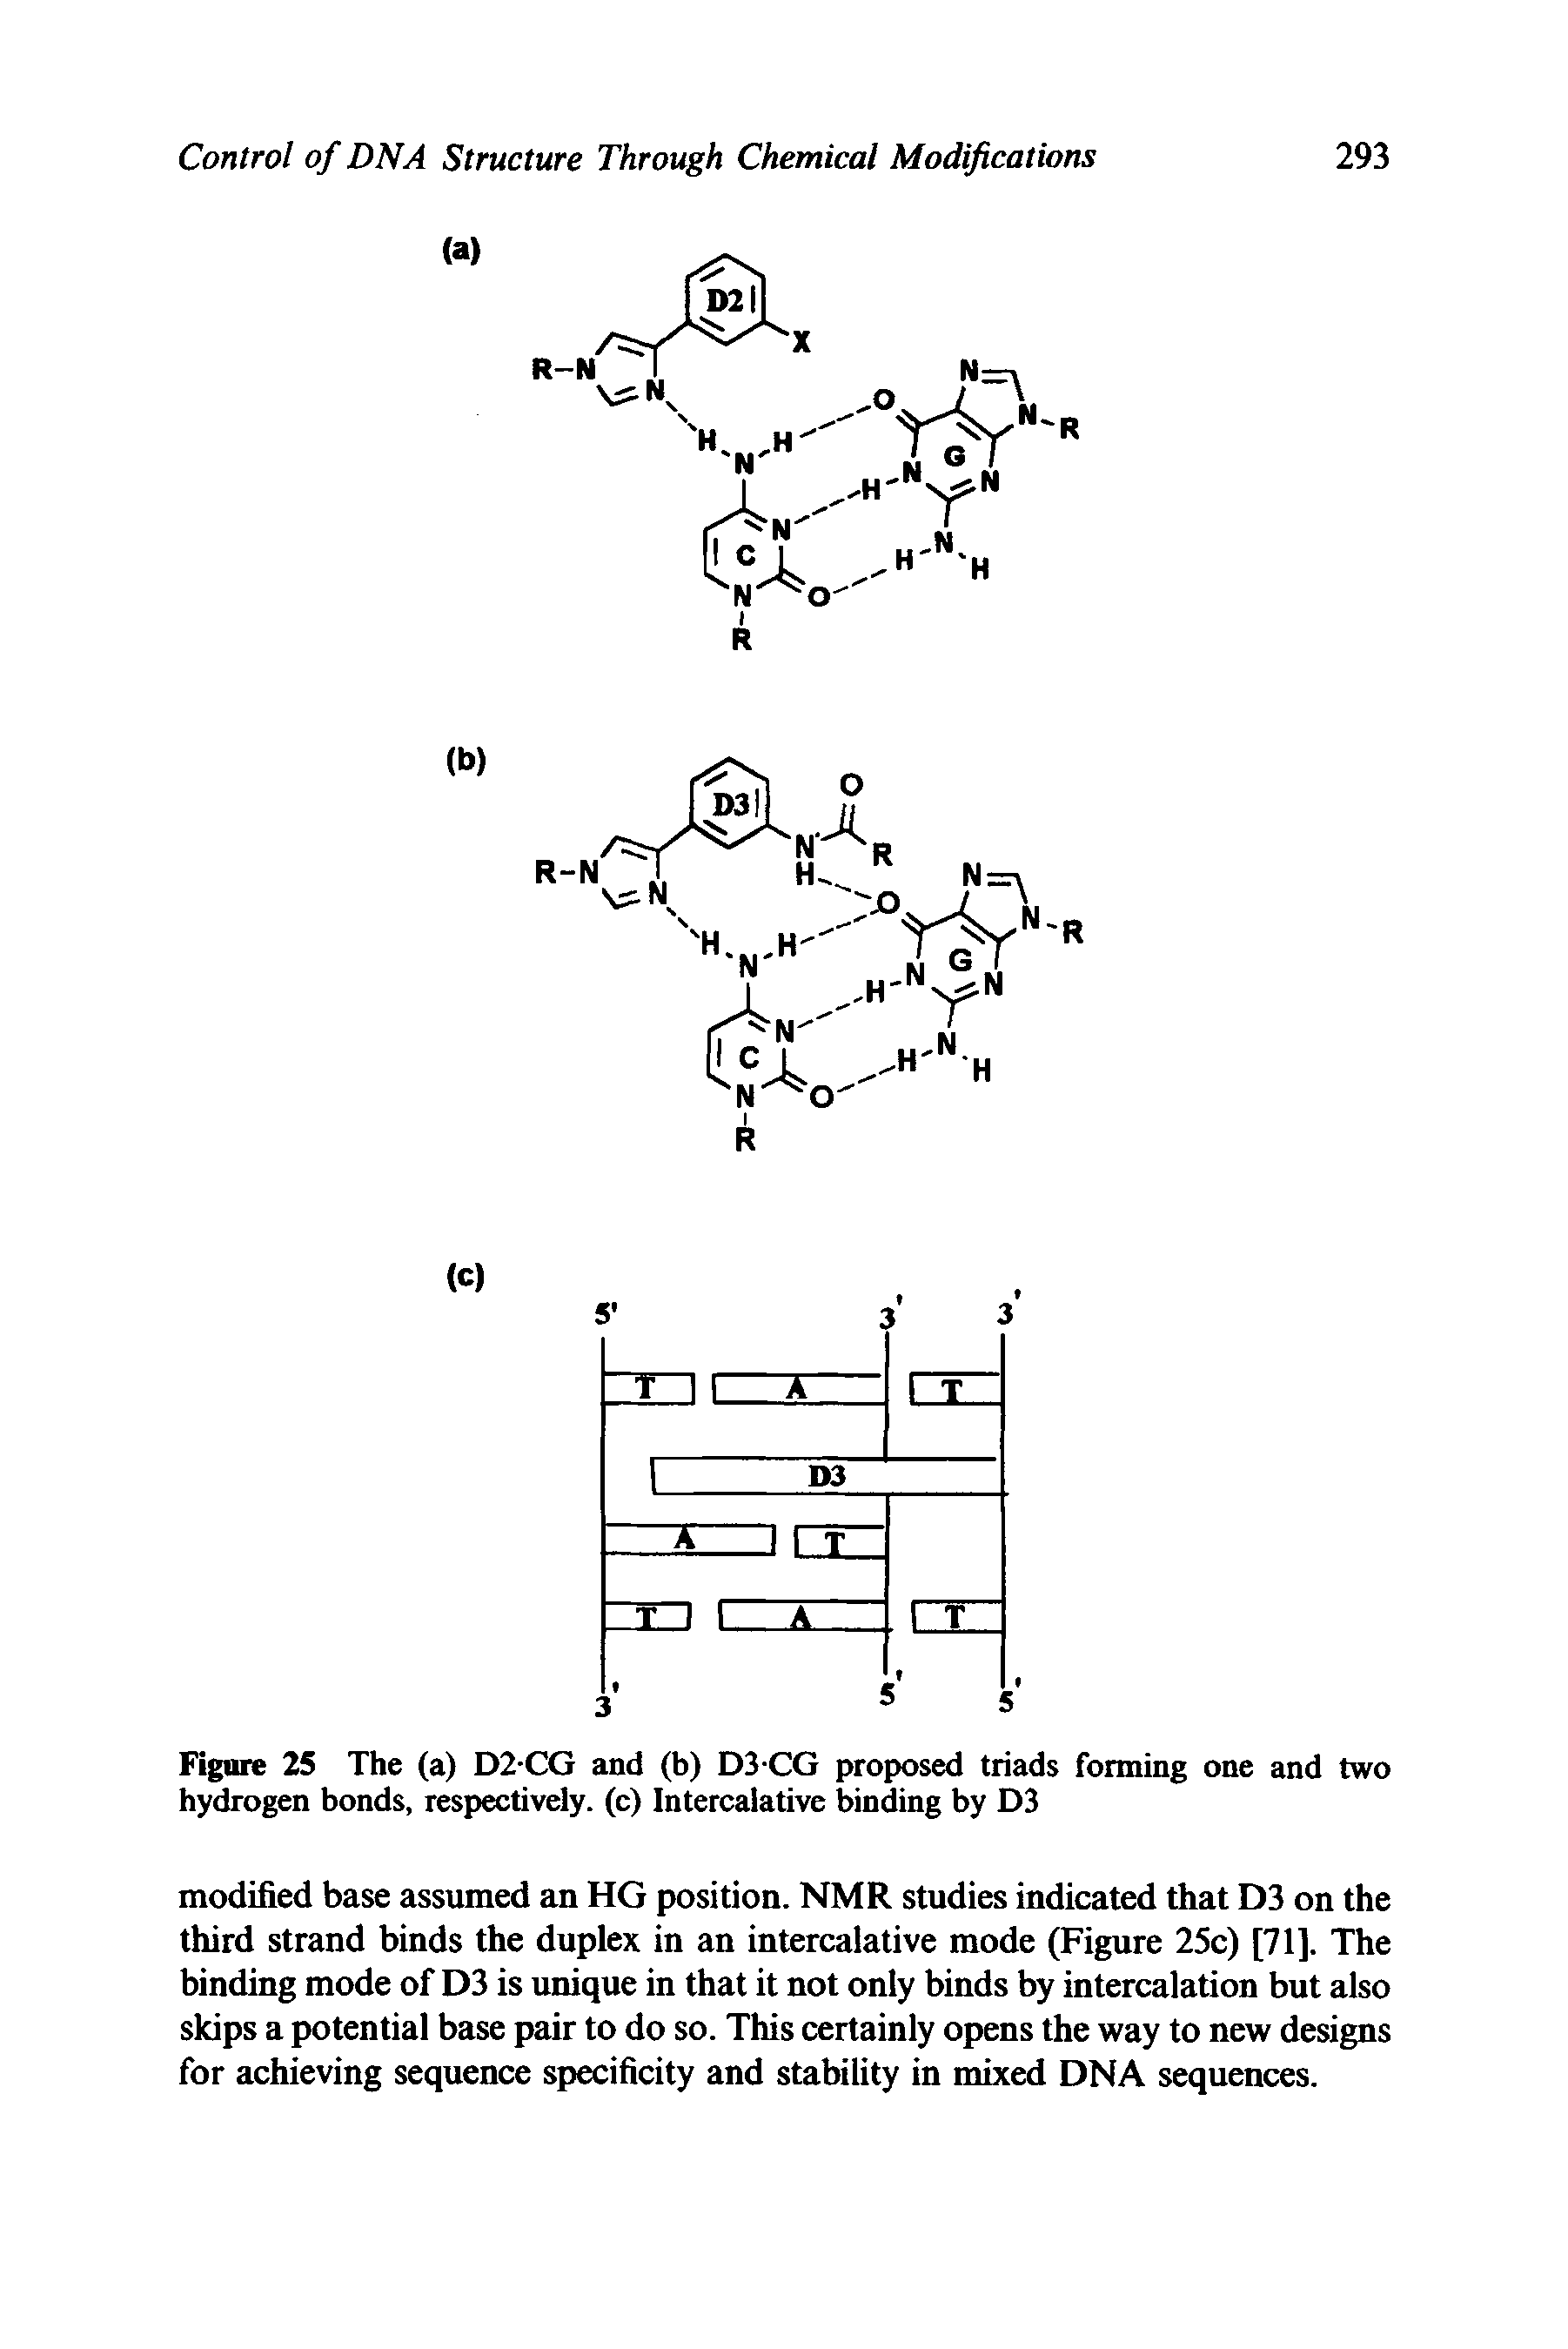 Figure 25 The (a) D2 CG and (b) D3 CG proposed triads forming one and two hydrogen bonds, respectively, (c) Intercalative binding by D3...